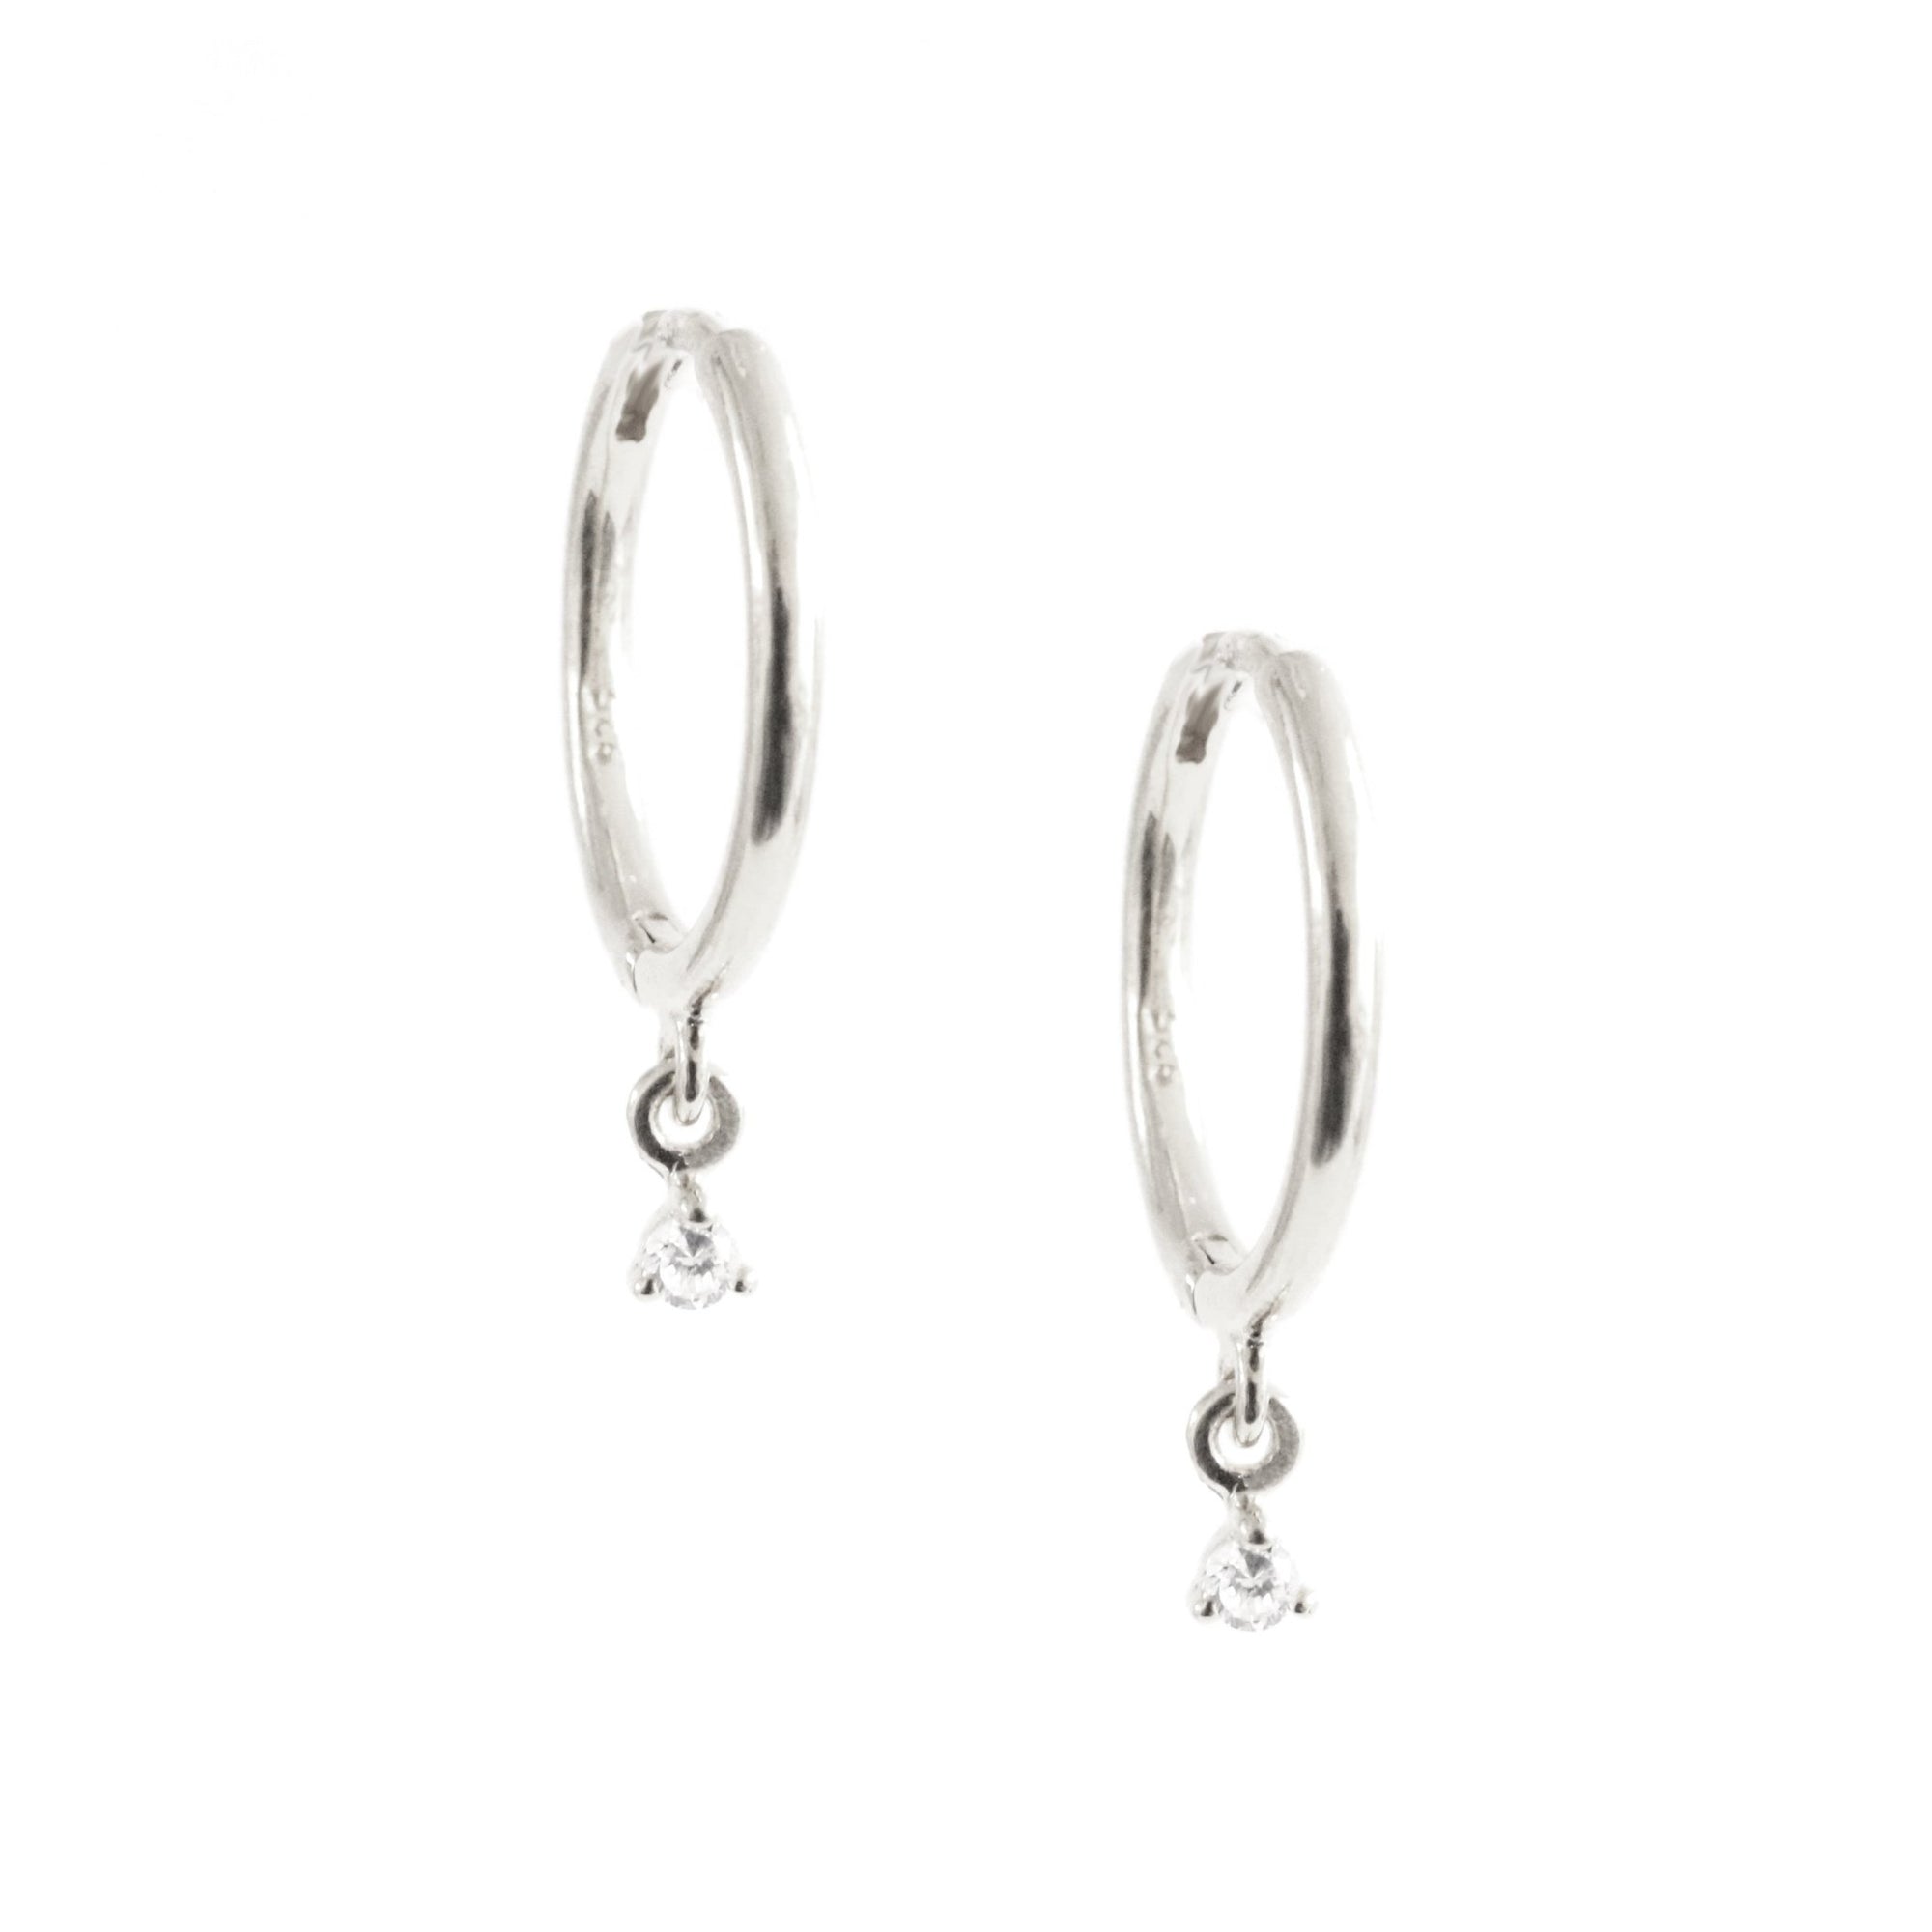 LOVE CHARM HUGGIE HOOPS - CUBIC ZIRCONIA & SILVER - SO PRETTY CARA COTTER